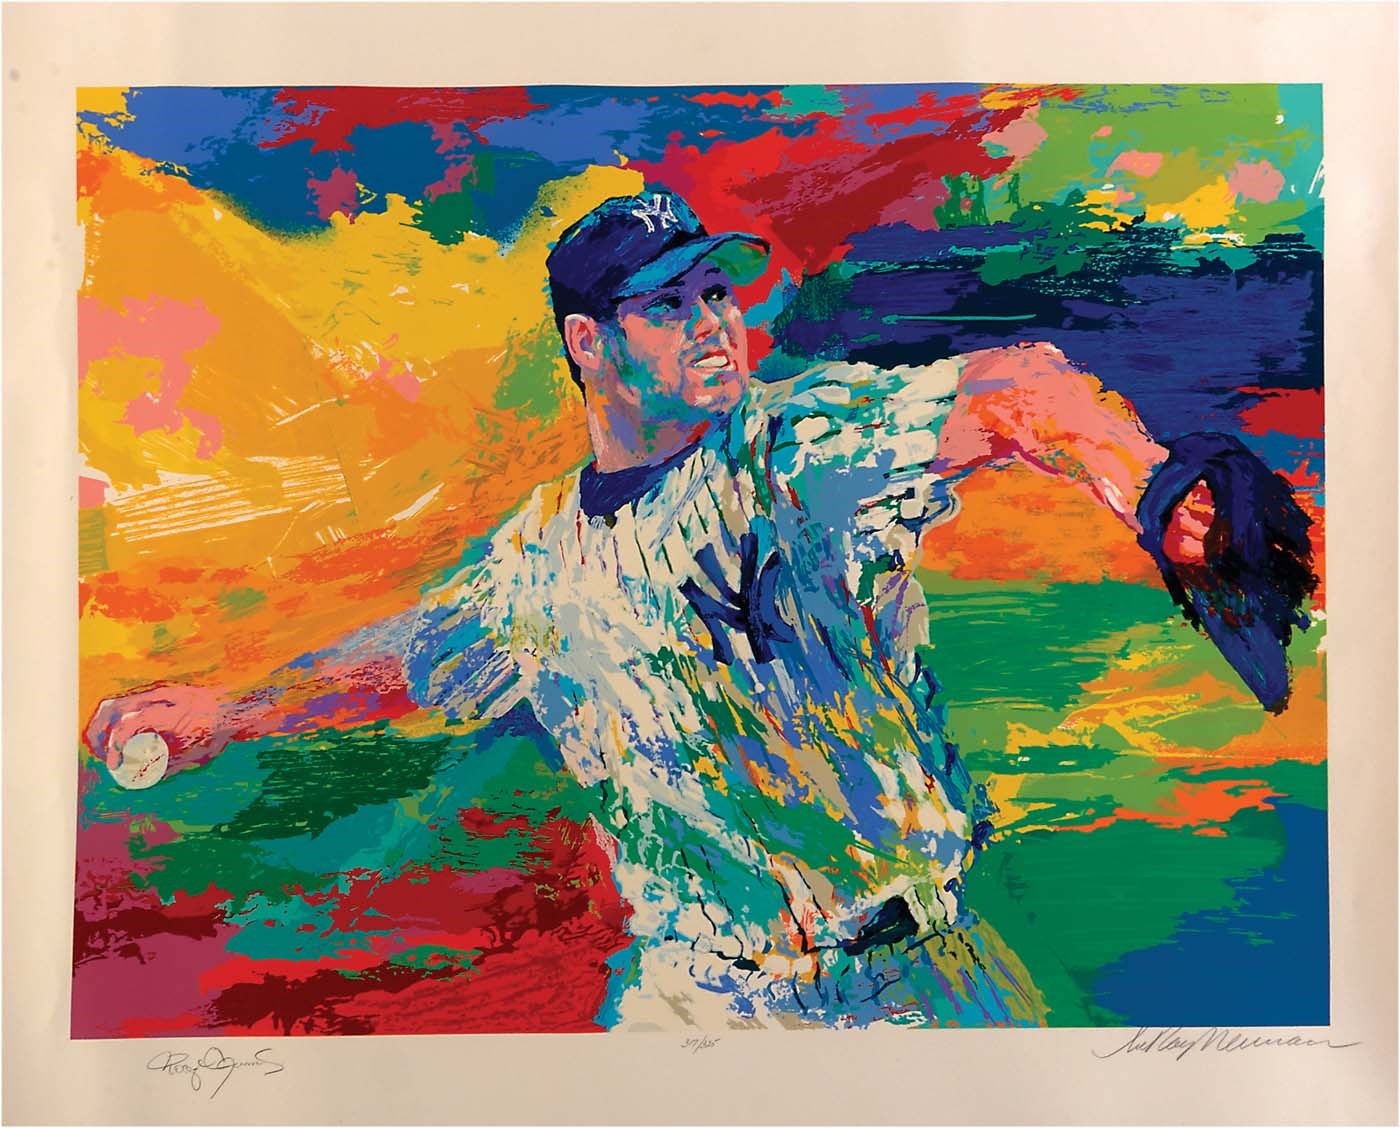 Baseball Autographs - Roger Clemens Serigraph by LeRoy Neiman - Signed by Both